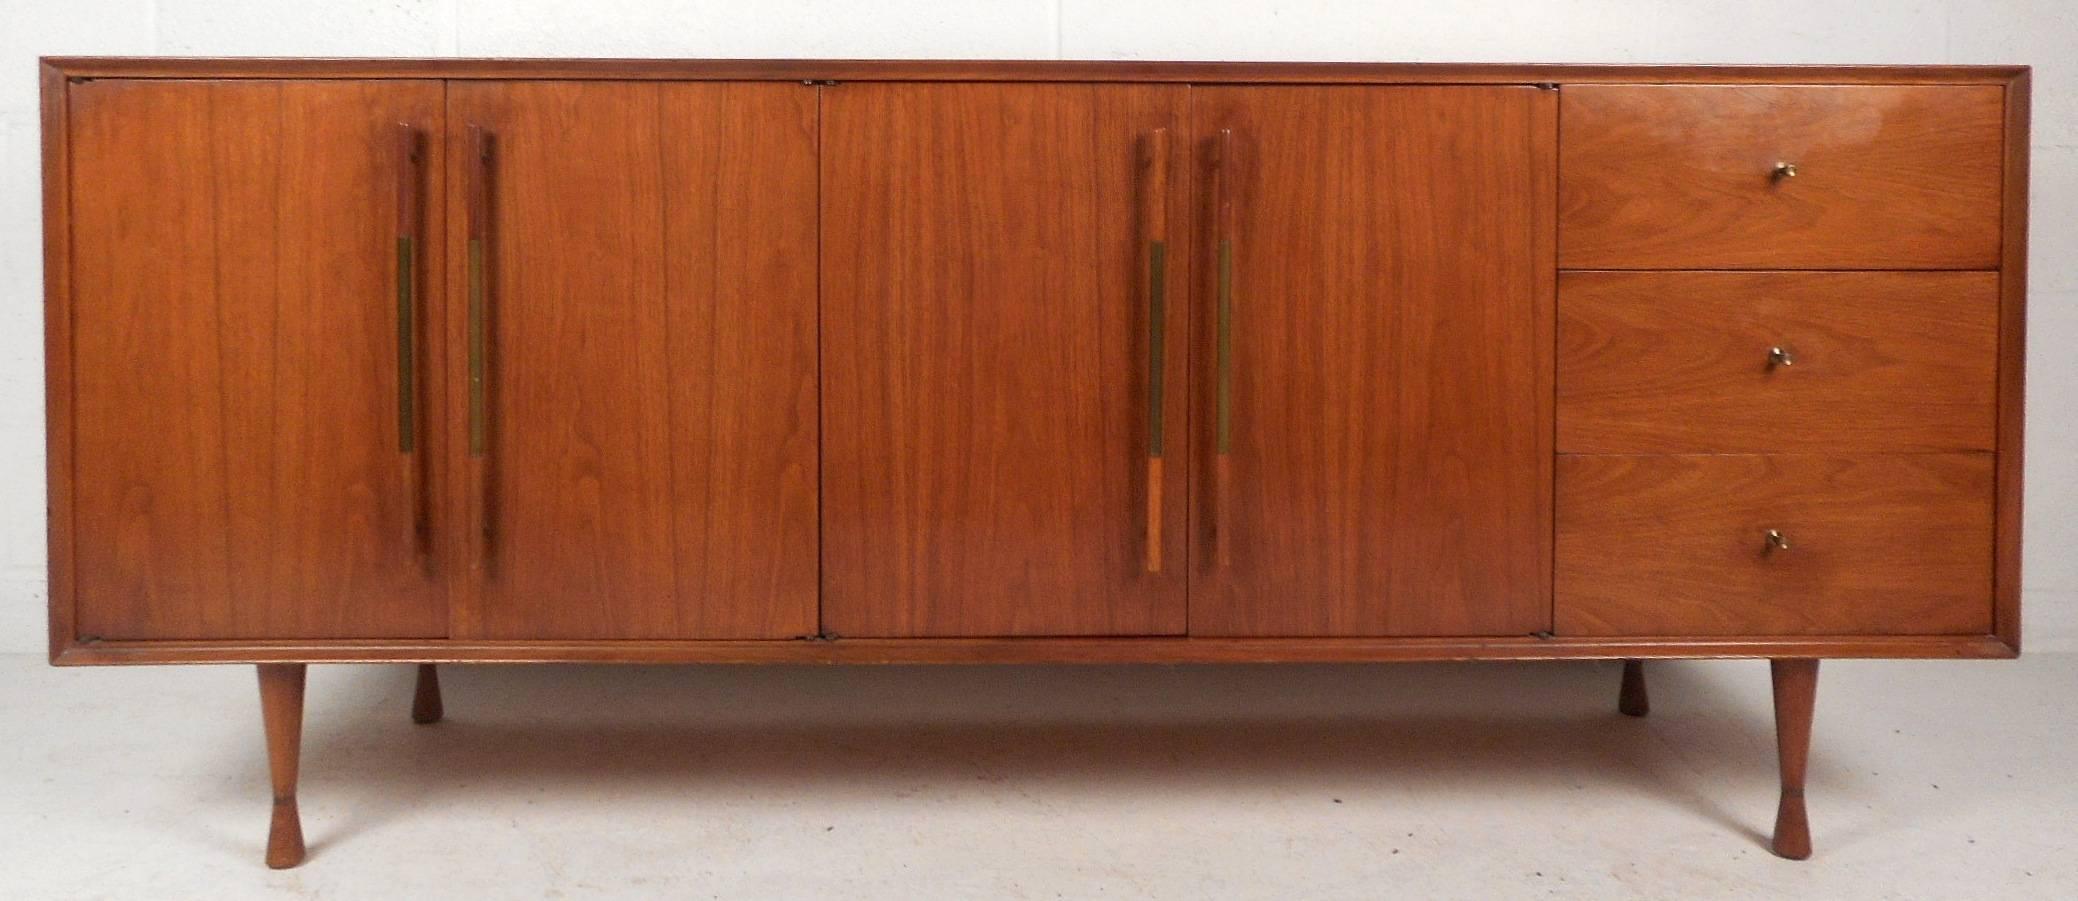 This elegant vintage modern sideboard features unusual long cylindrical pulls on each cabinet with a brass grip in the middle. There is plenty of room for storage within its three large drawers and four cabinets that hide shelving compartments.